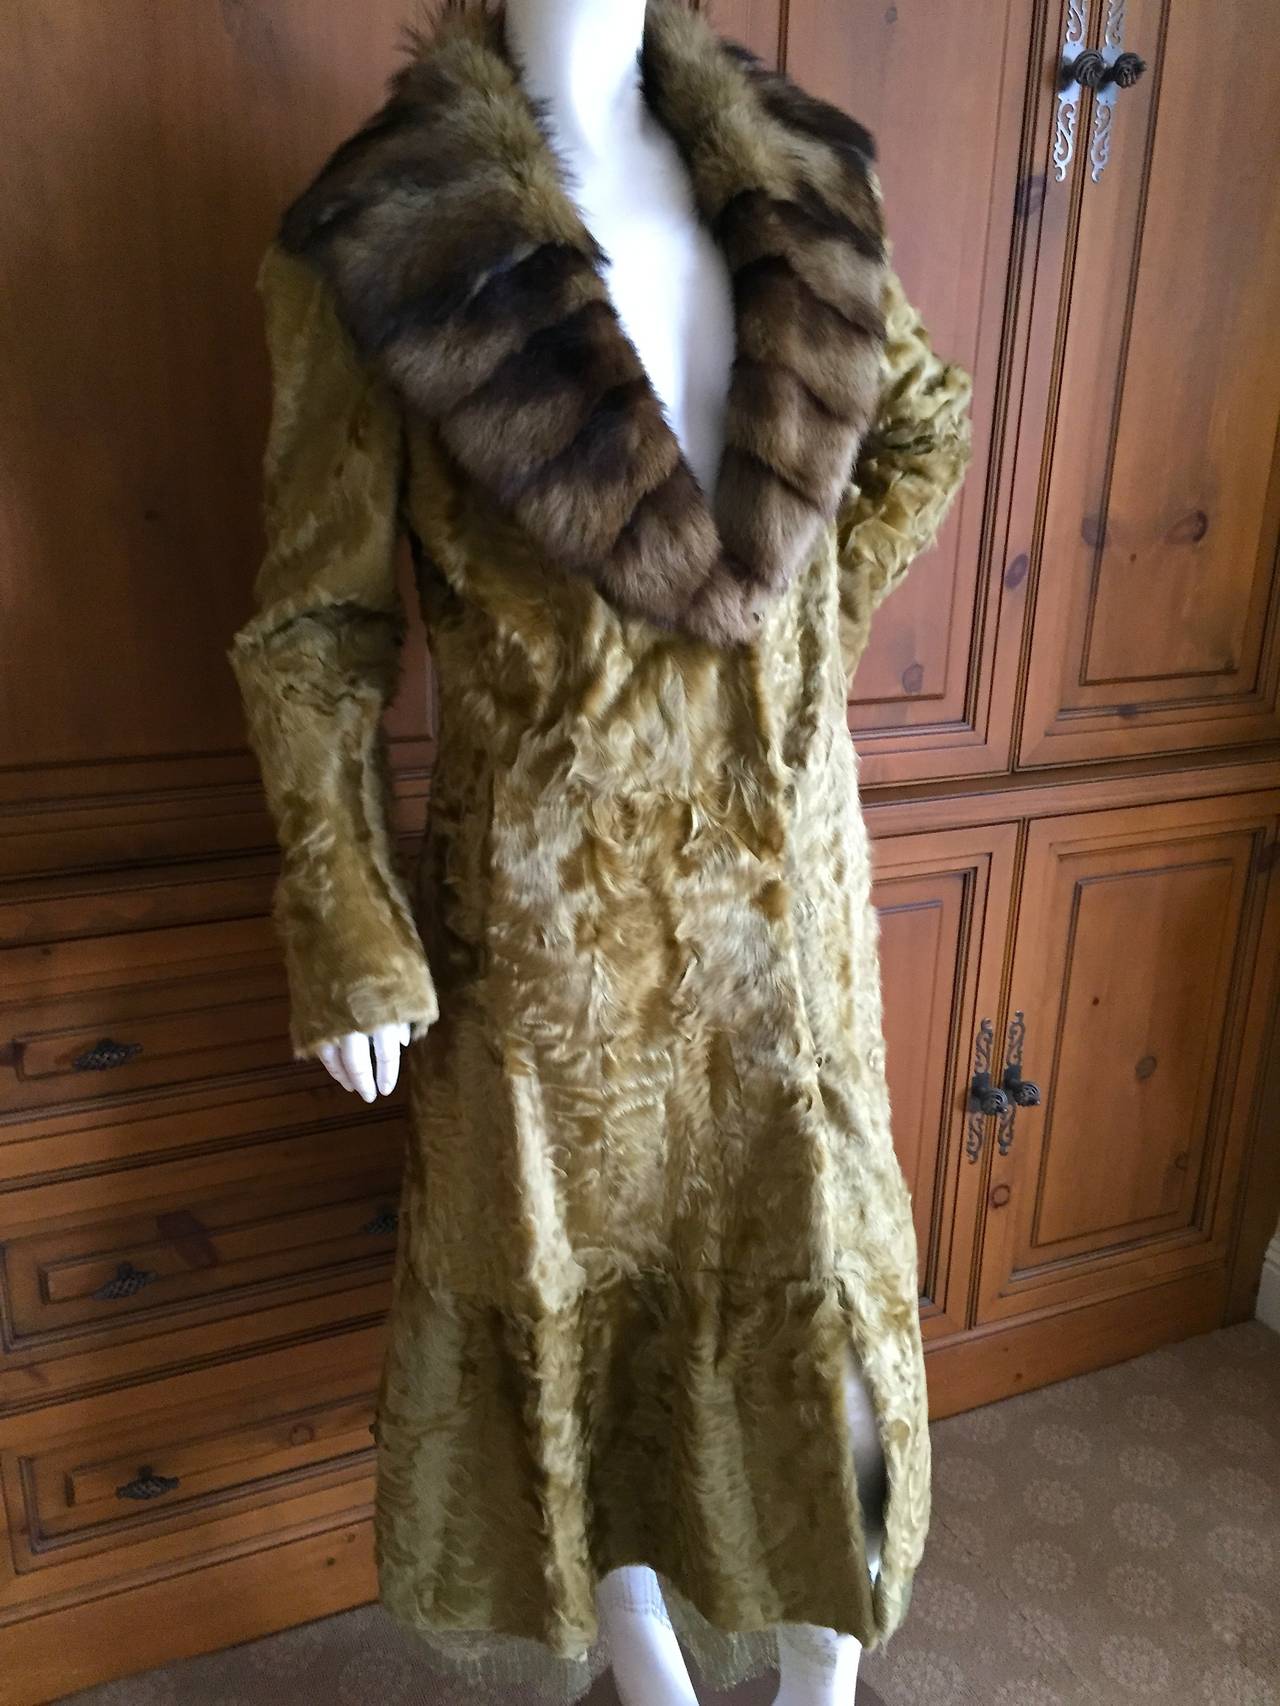 Beautiful green broadtail lamb coat from Zac Pozen for Neiman Marcus.
This is so beautiful, with a wide brown fur collar.
This has a generous 86